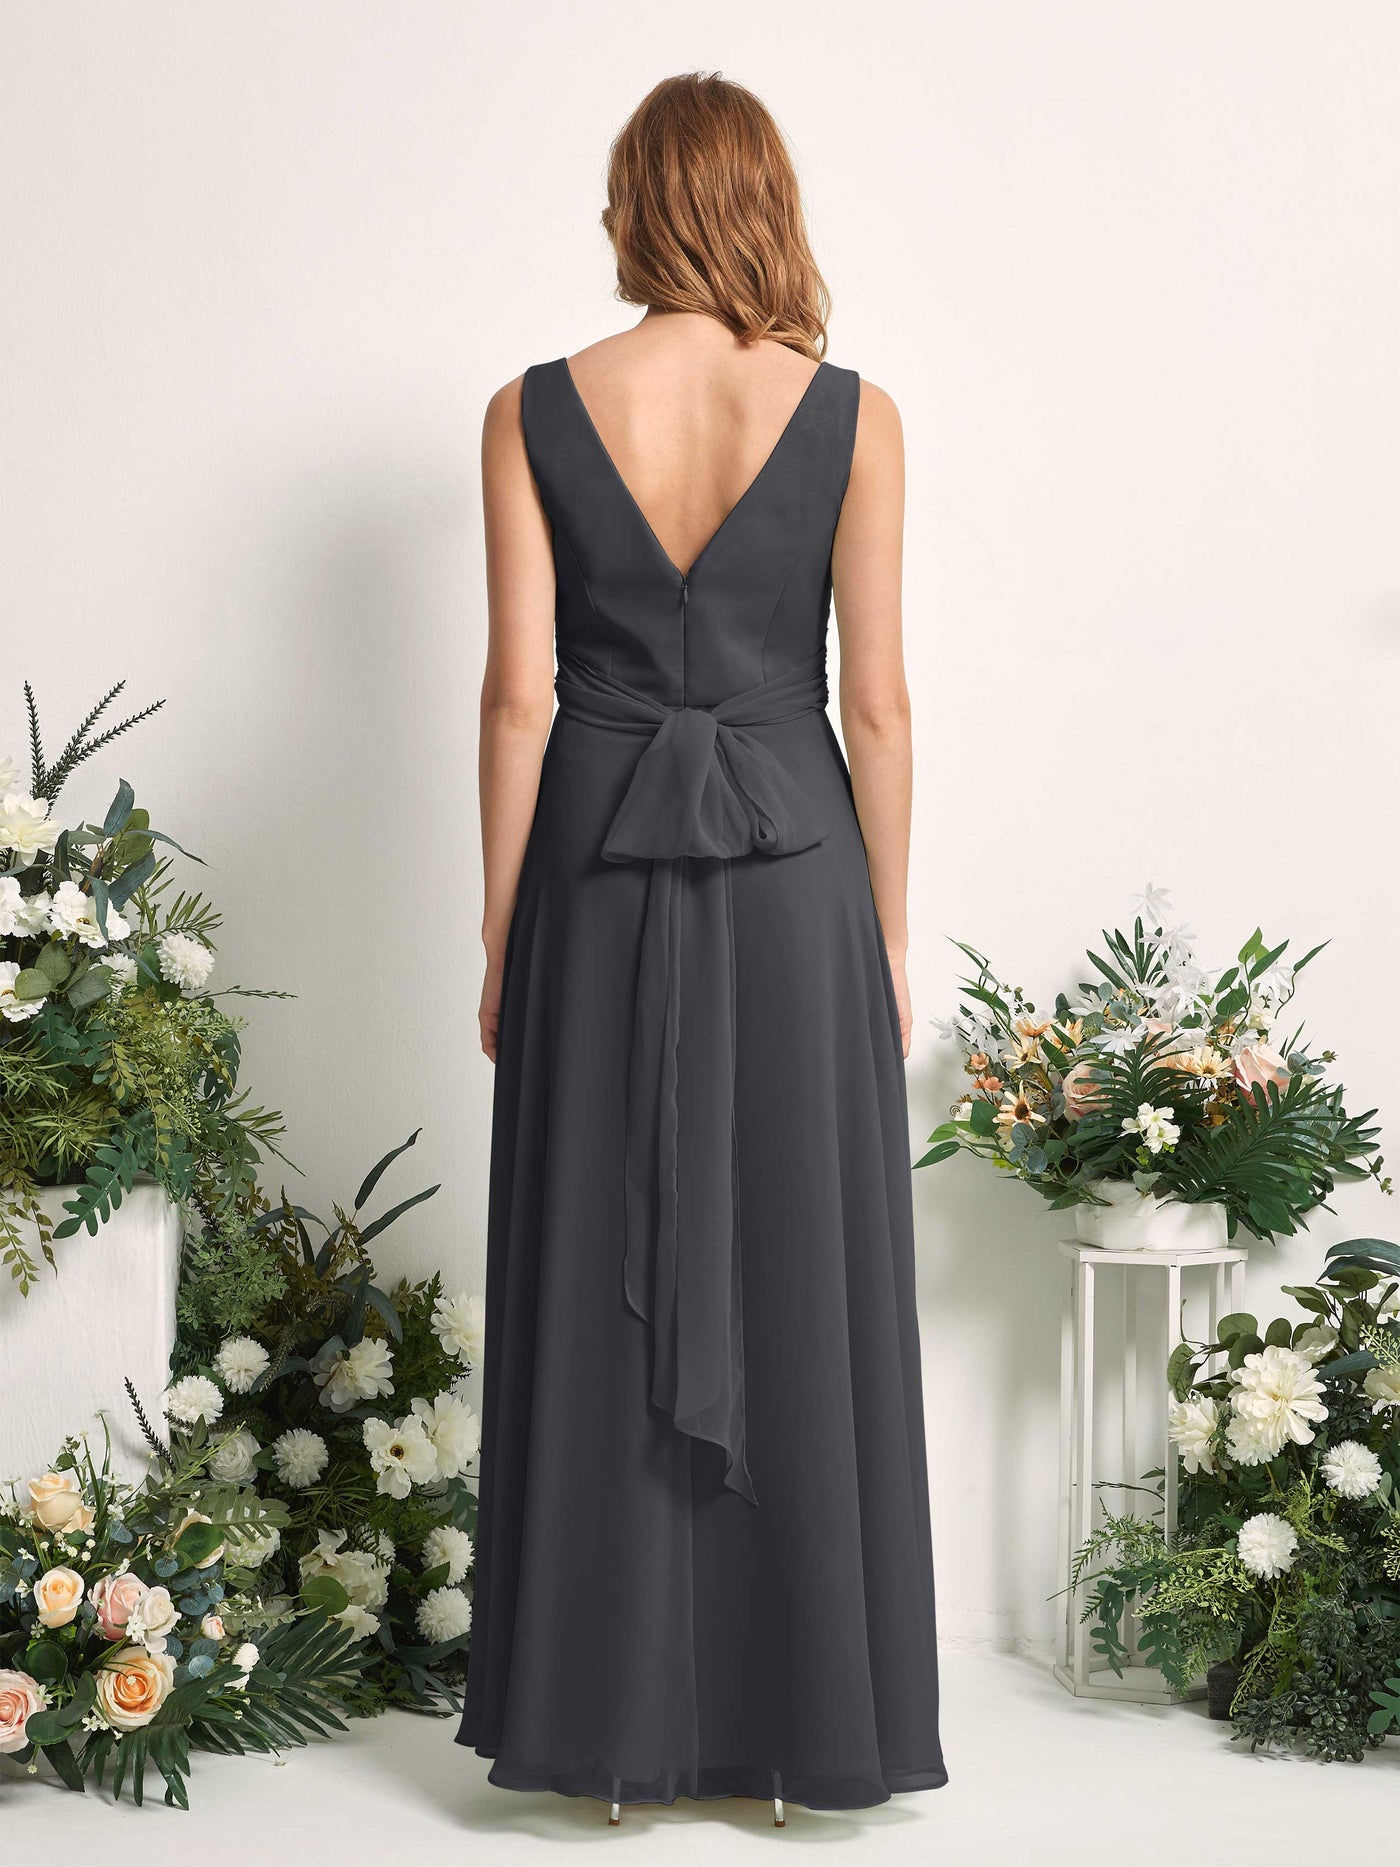 Bridesmaid Dress A-line Chiffon Straps Full Length Sleeveless Wedding Party Dress - Pewter (81227338)#color_pewter